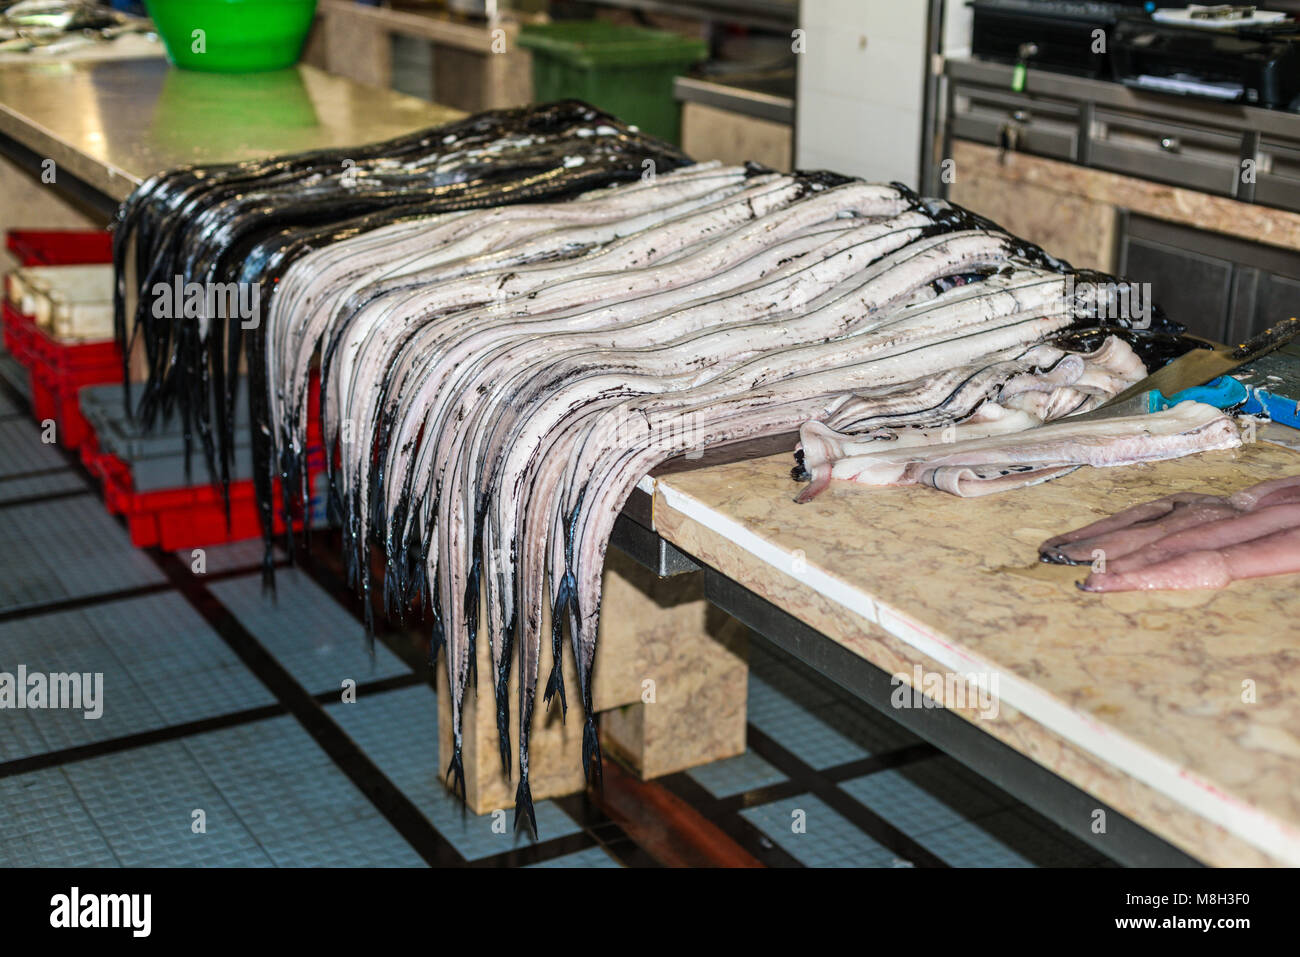 Atlantic largehead hairtail or beltfish (also called espada in Portuguese) on traditional fish market Mercado dos Lavradores in Funchal, Madeira islan Stock Photo